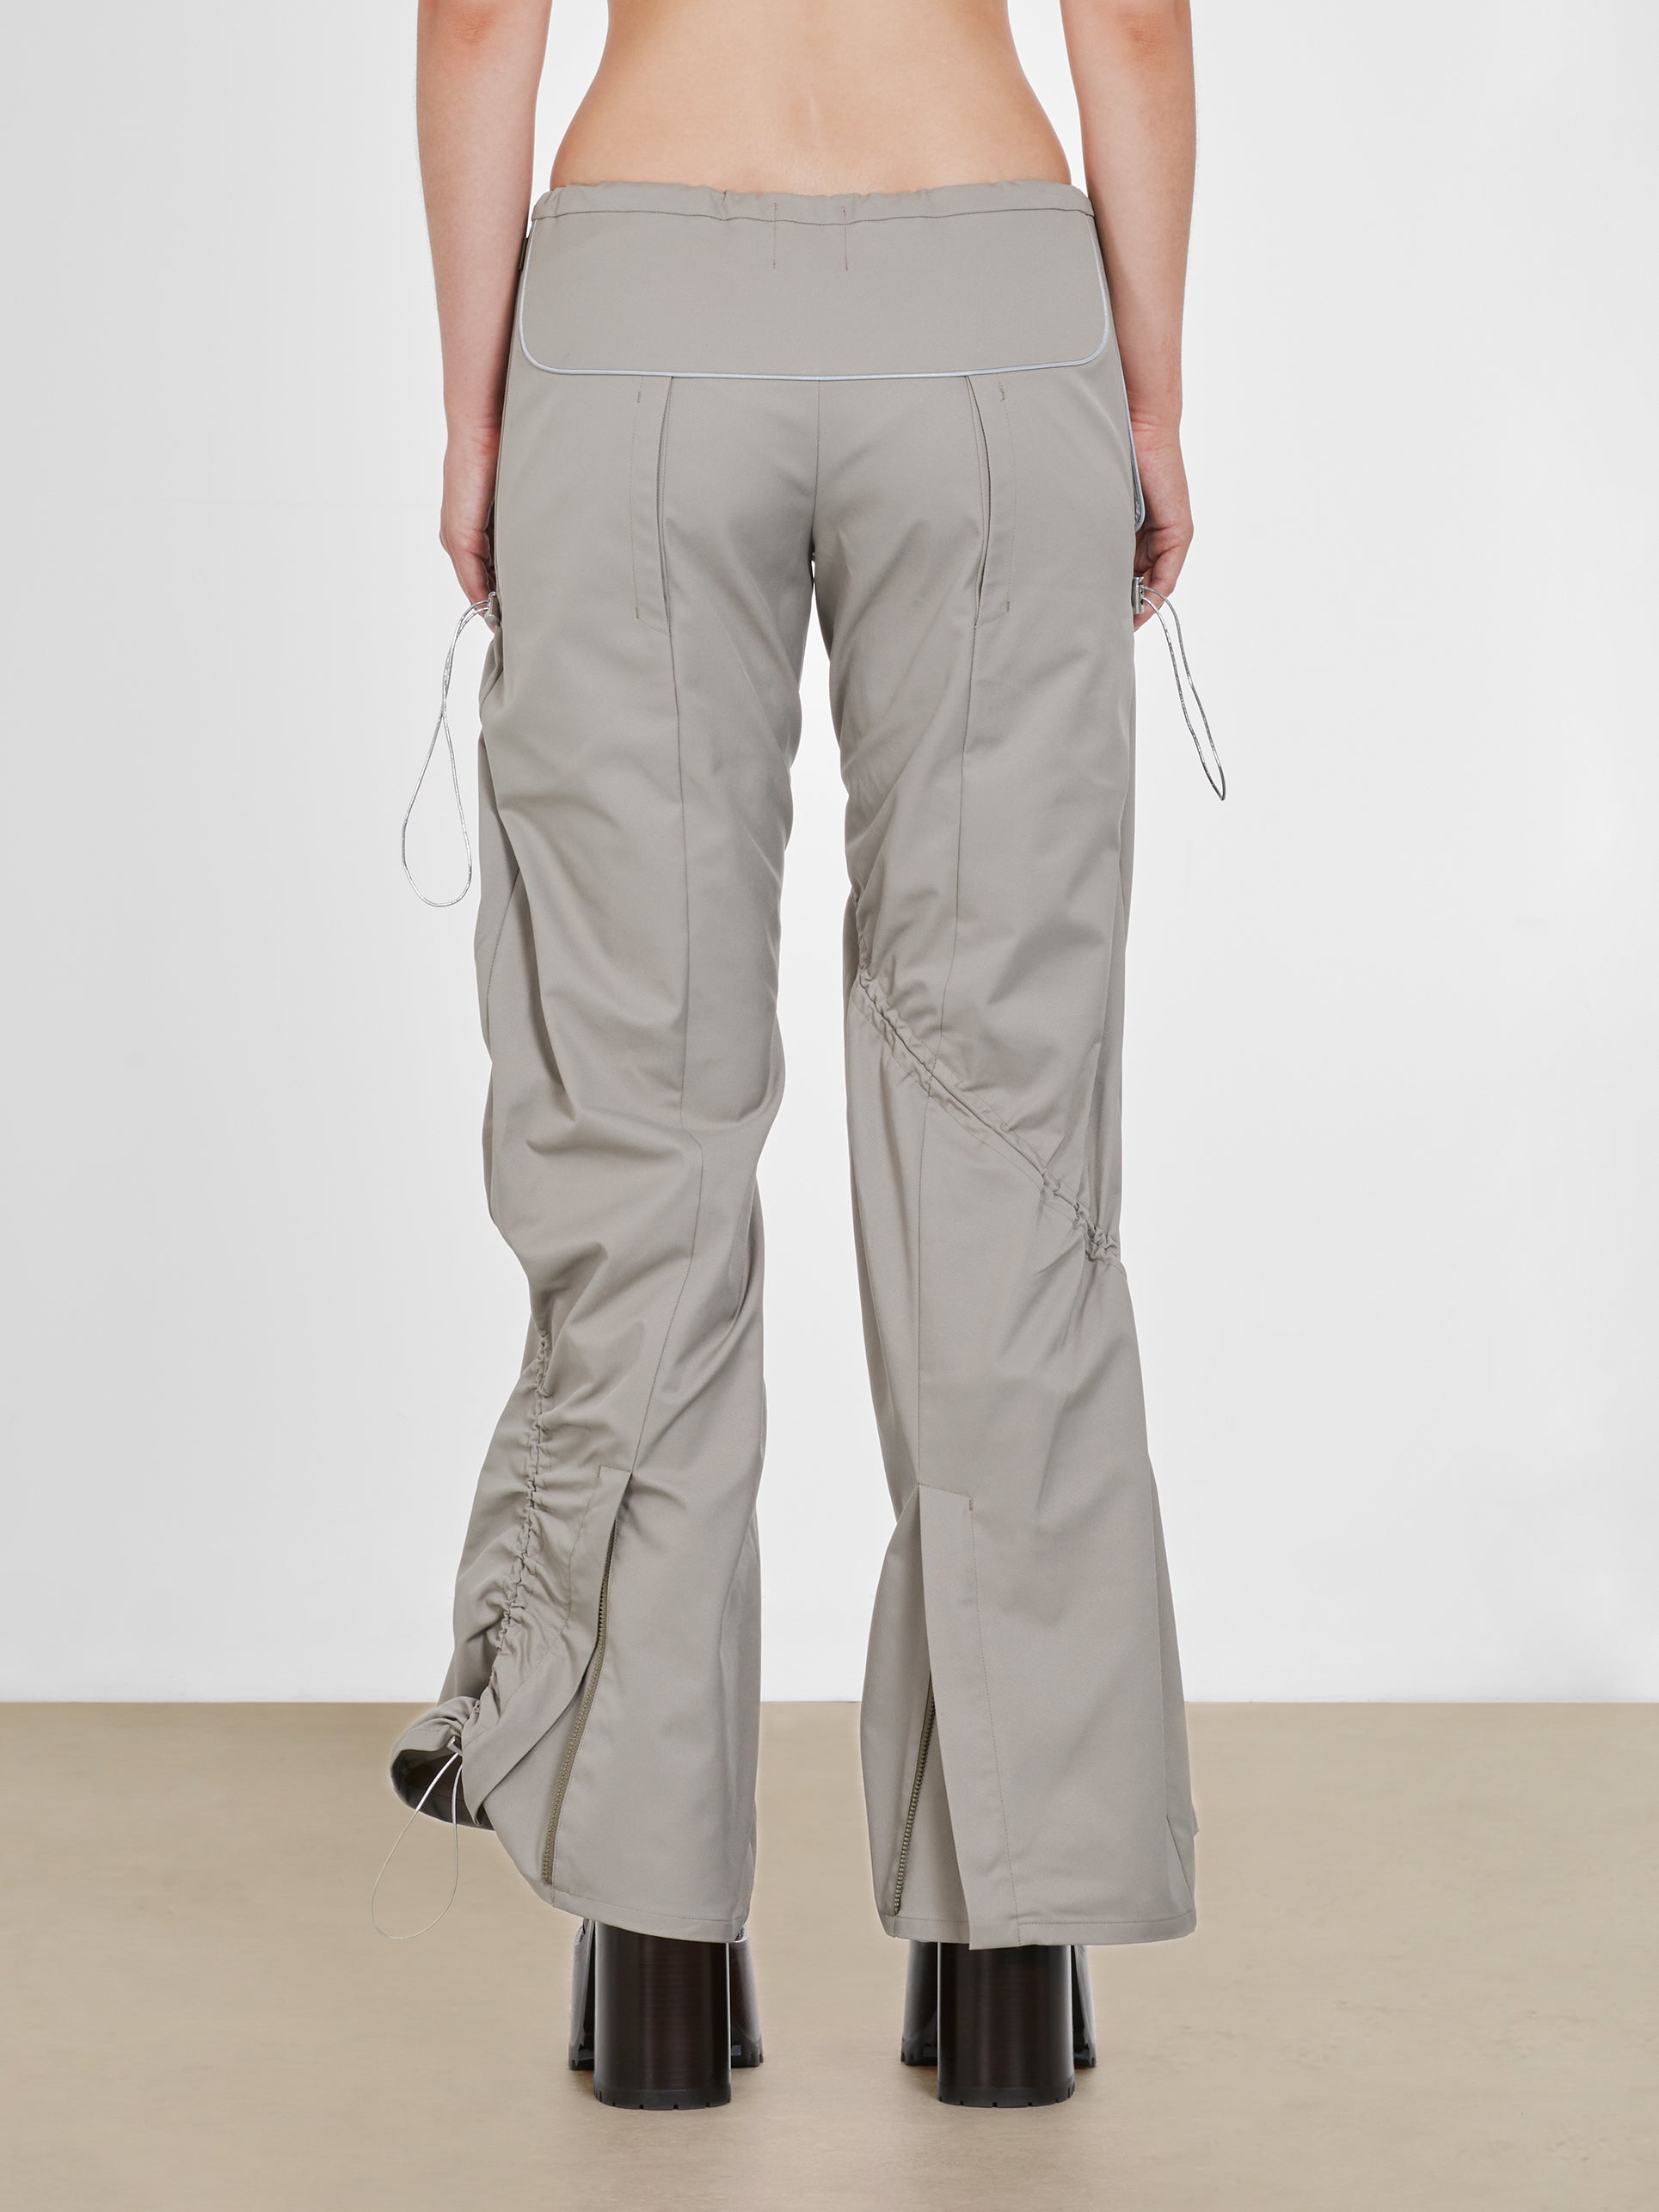 Heaven By Marc Jacobs - Women's Gathered Wide Leg Pant - (Military)